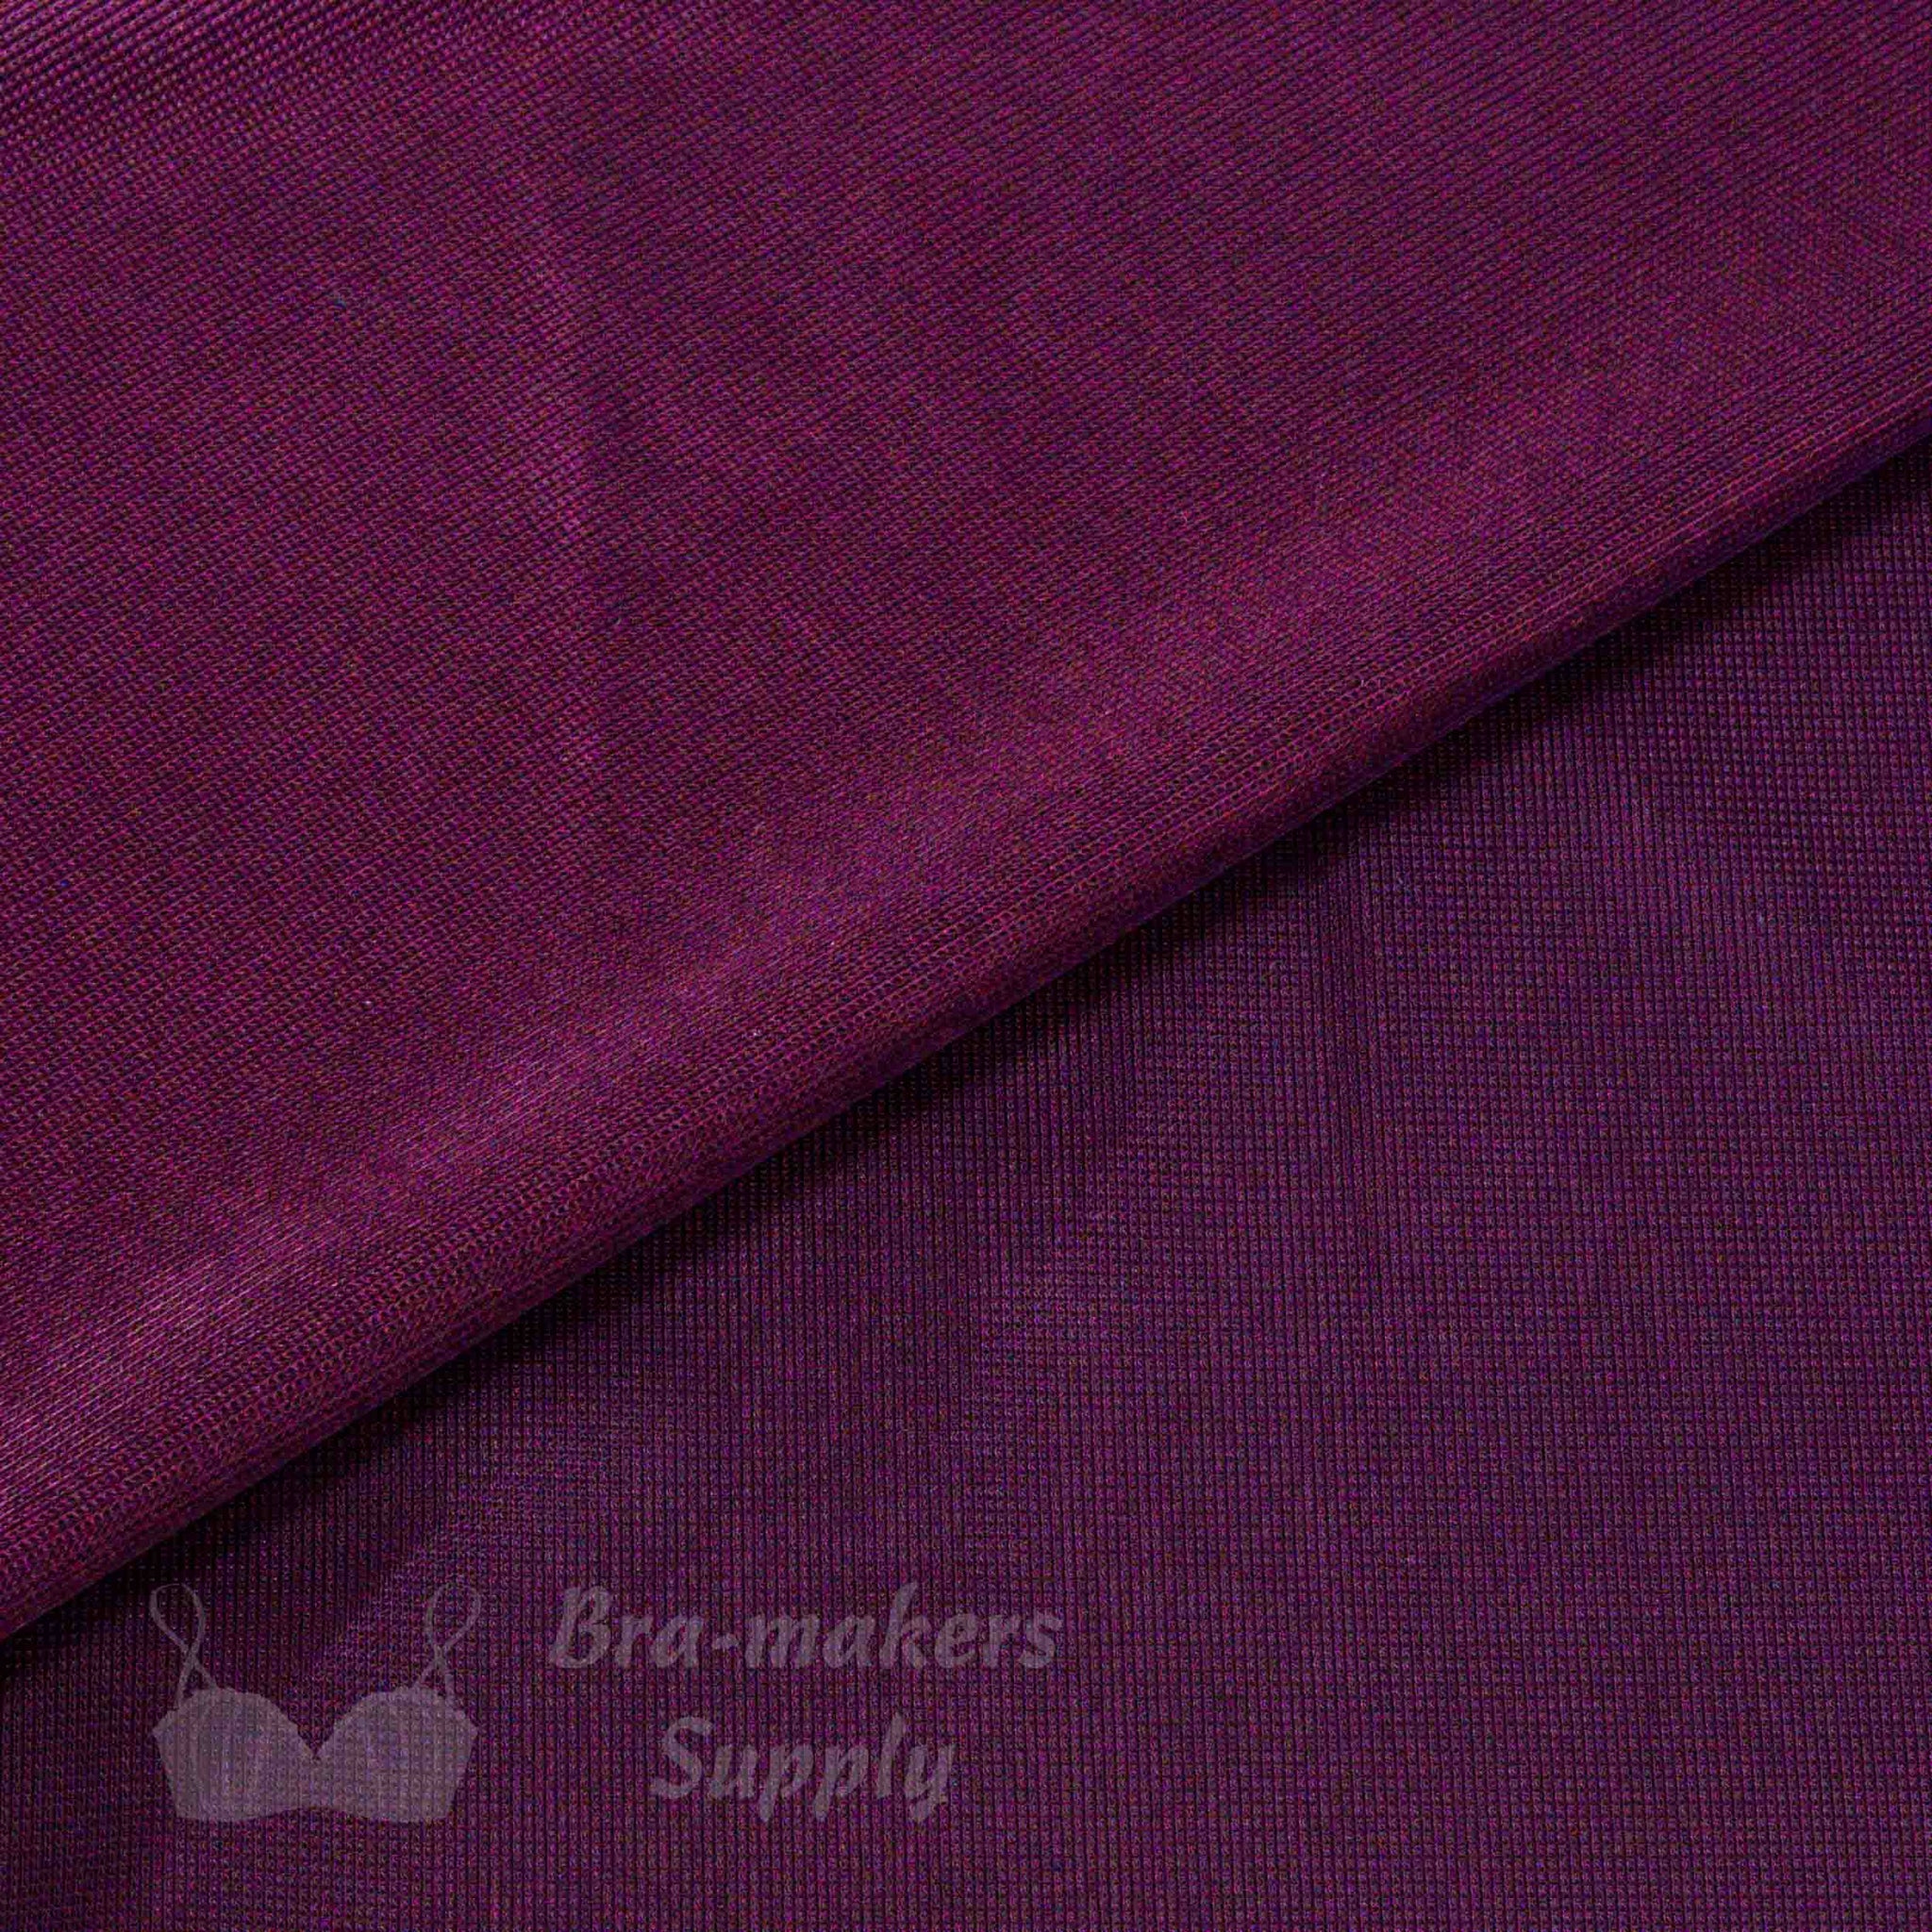 Bra/Lingerie Making - Cup Fabric - Tricot - Duoplex 165gsm